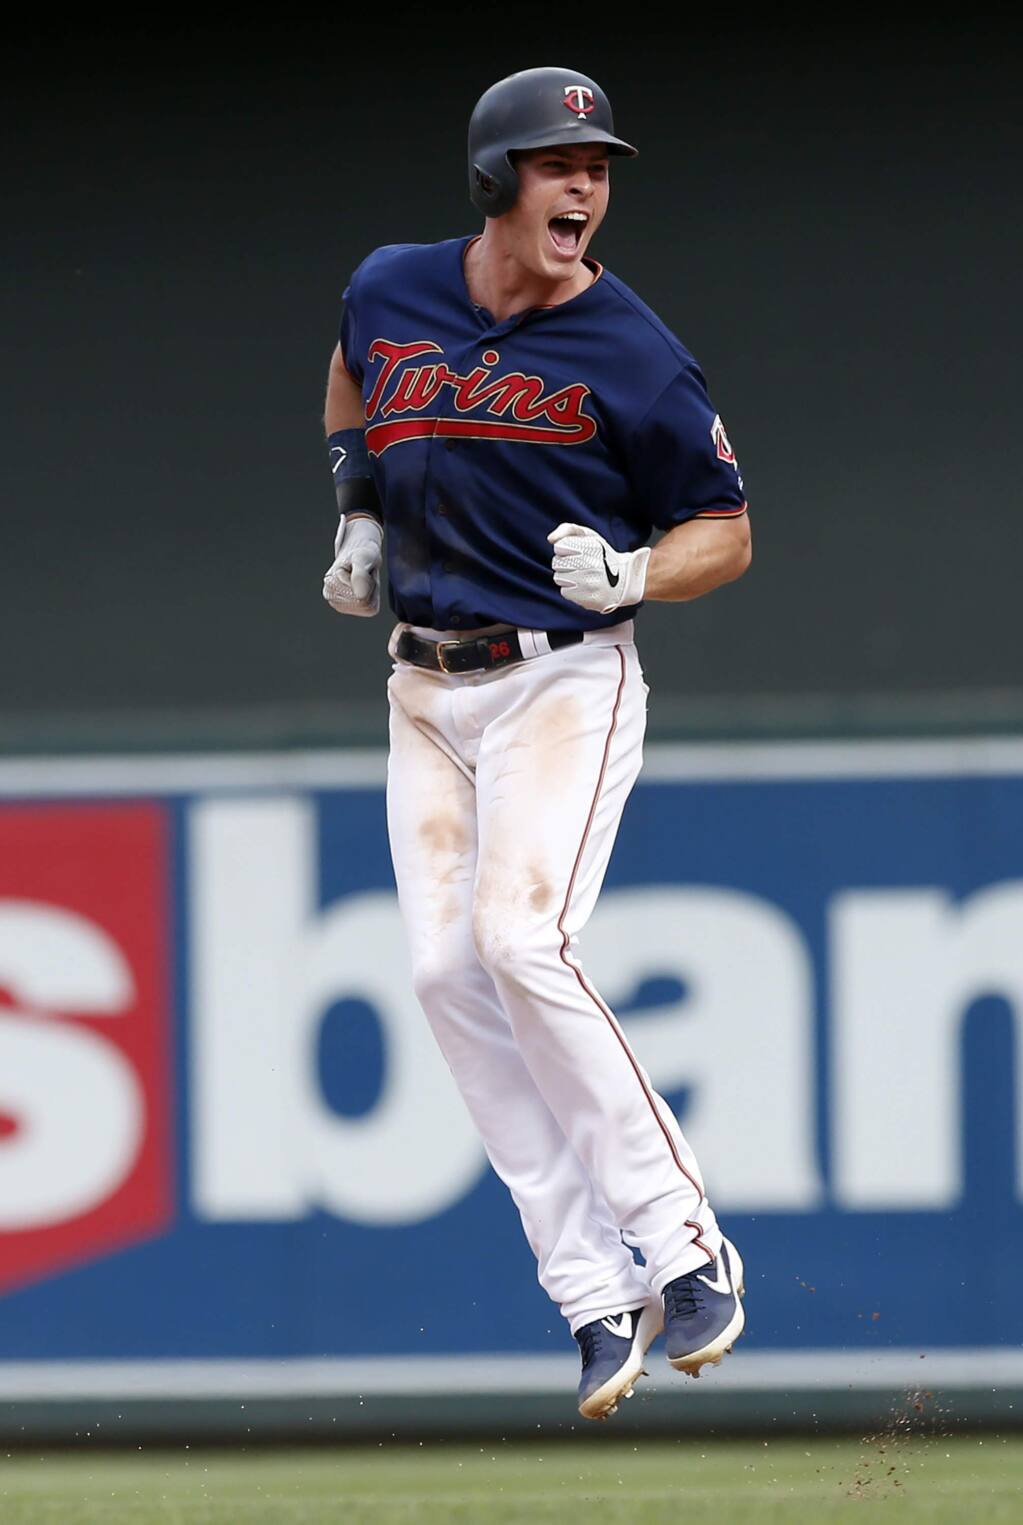 You're Wrong to Not Like Max Kepler - Twins - Twins Daily